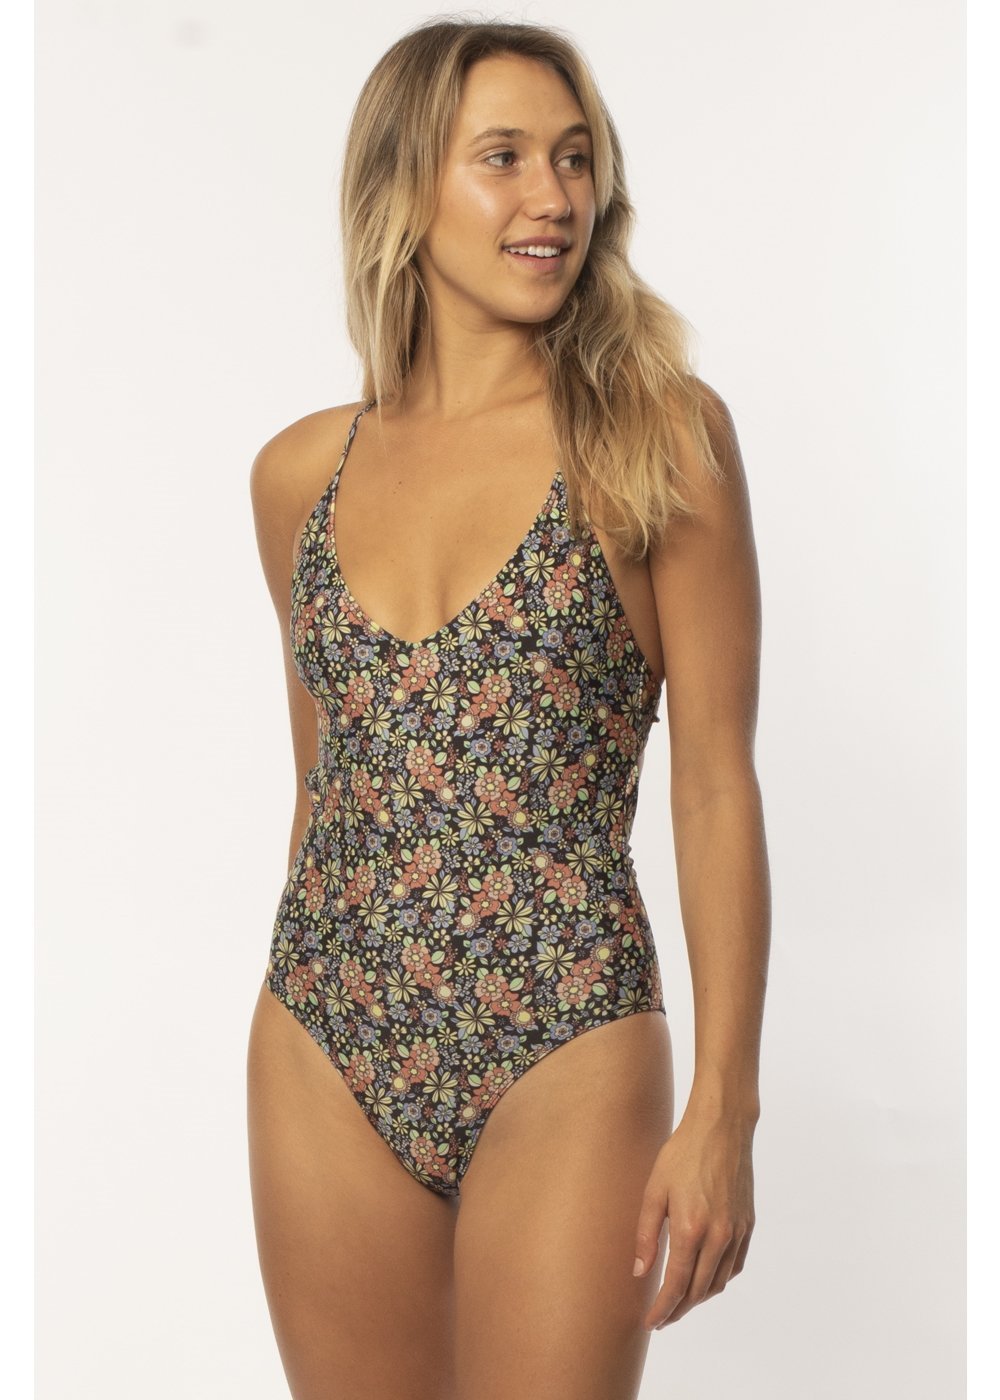 Fltr Ditsy Becklow One Piece.